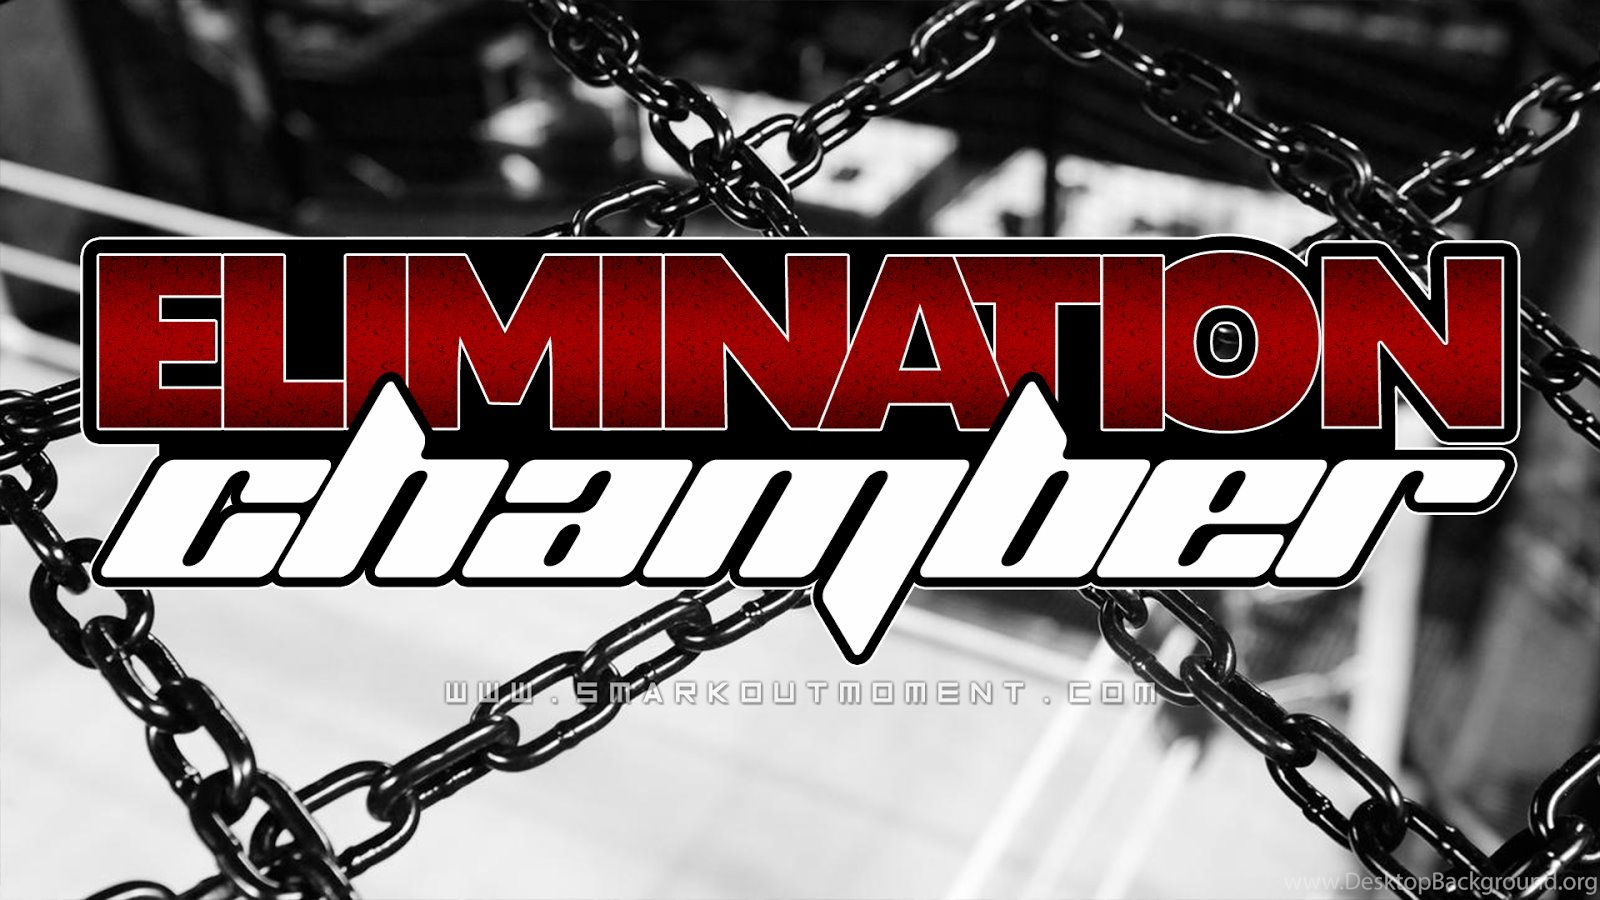 WWE Elimination Chamber PPV Wallpaper Posters And Logo Background. Desktop Background